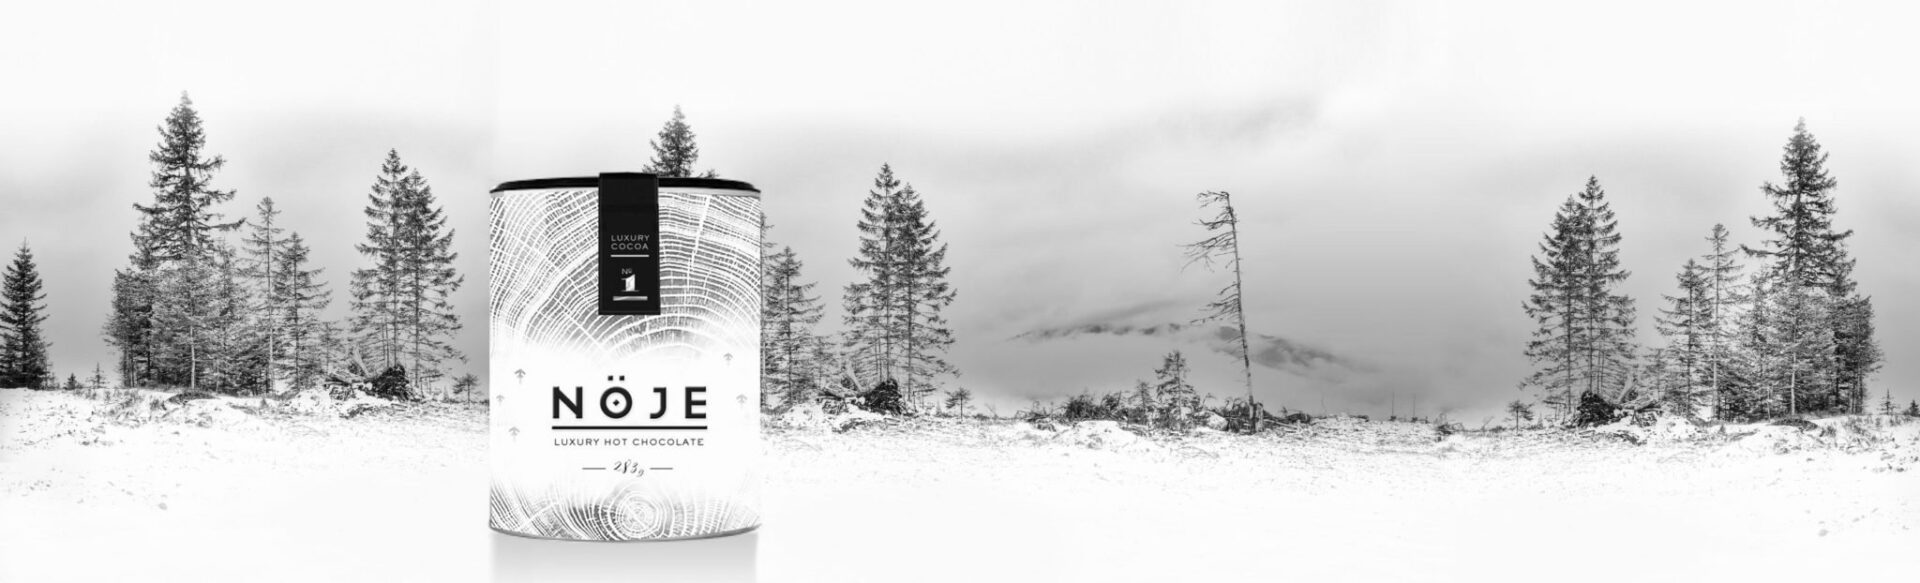 Noje brand identity and packaging design